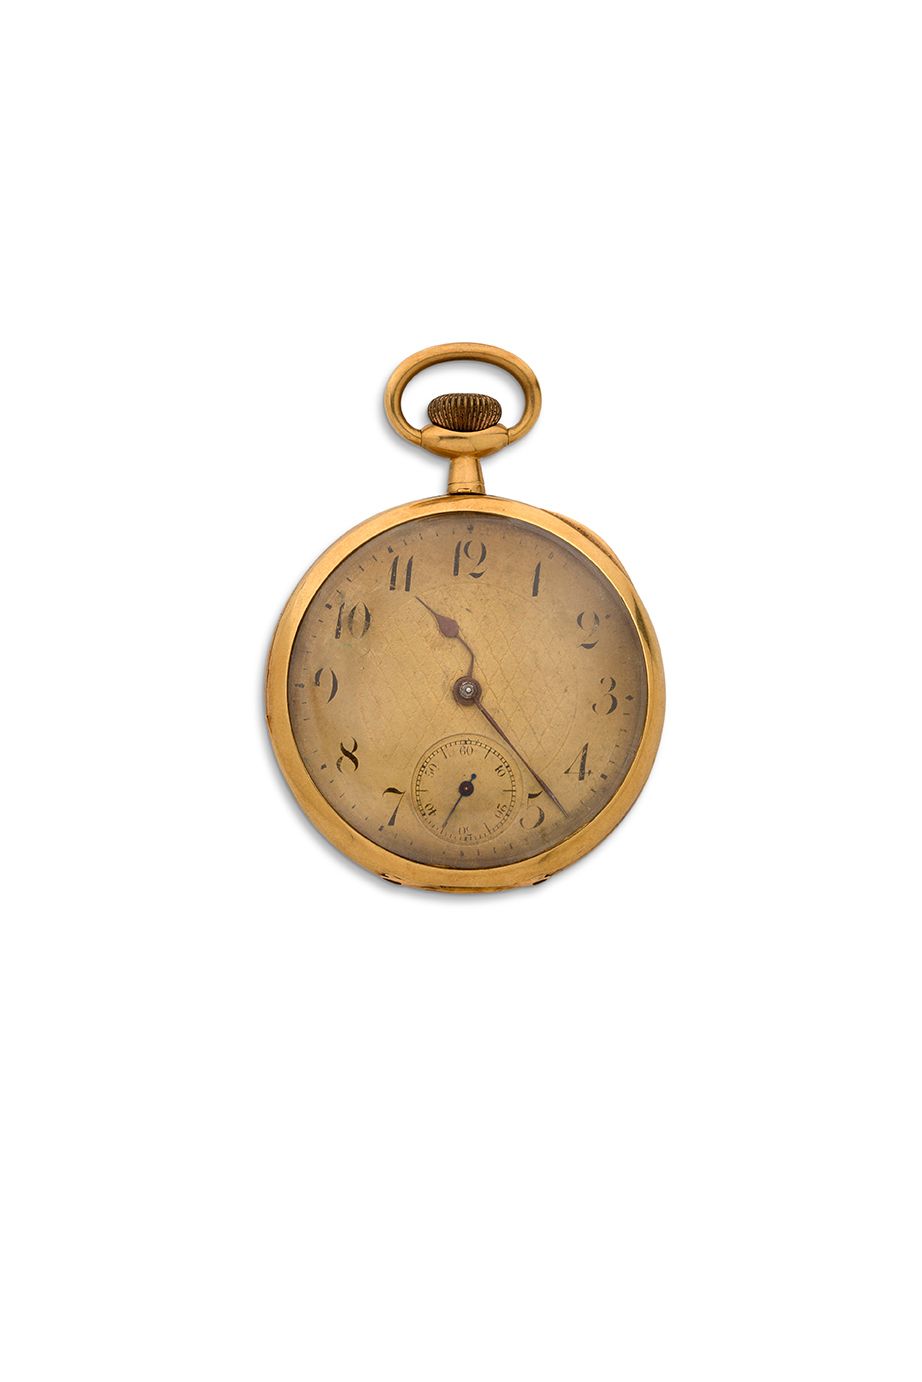 ANONYME 
Gold pocket watch with crown winding



Round case on hinge, fully smoo&hellip;